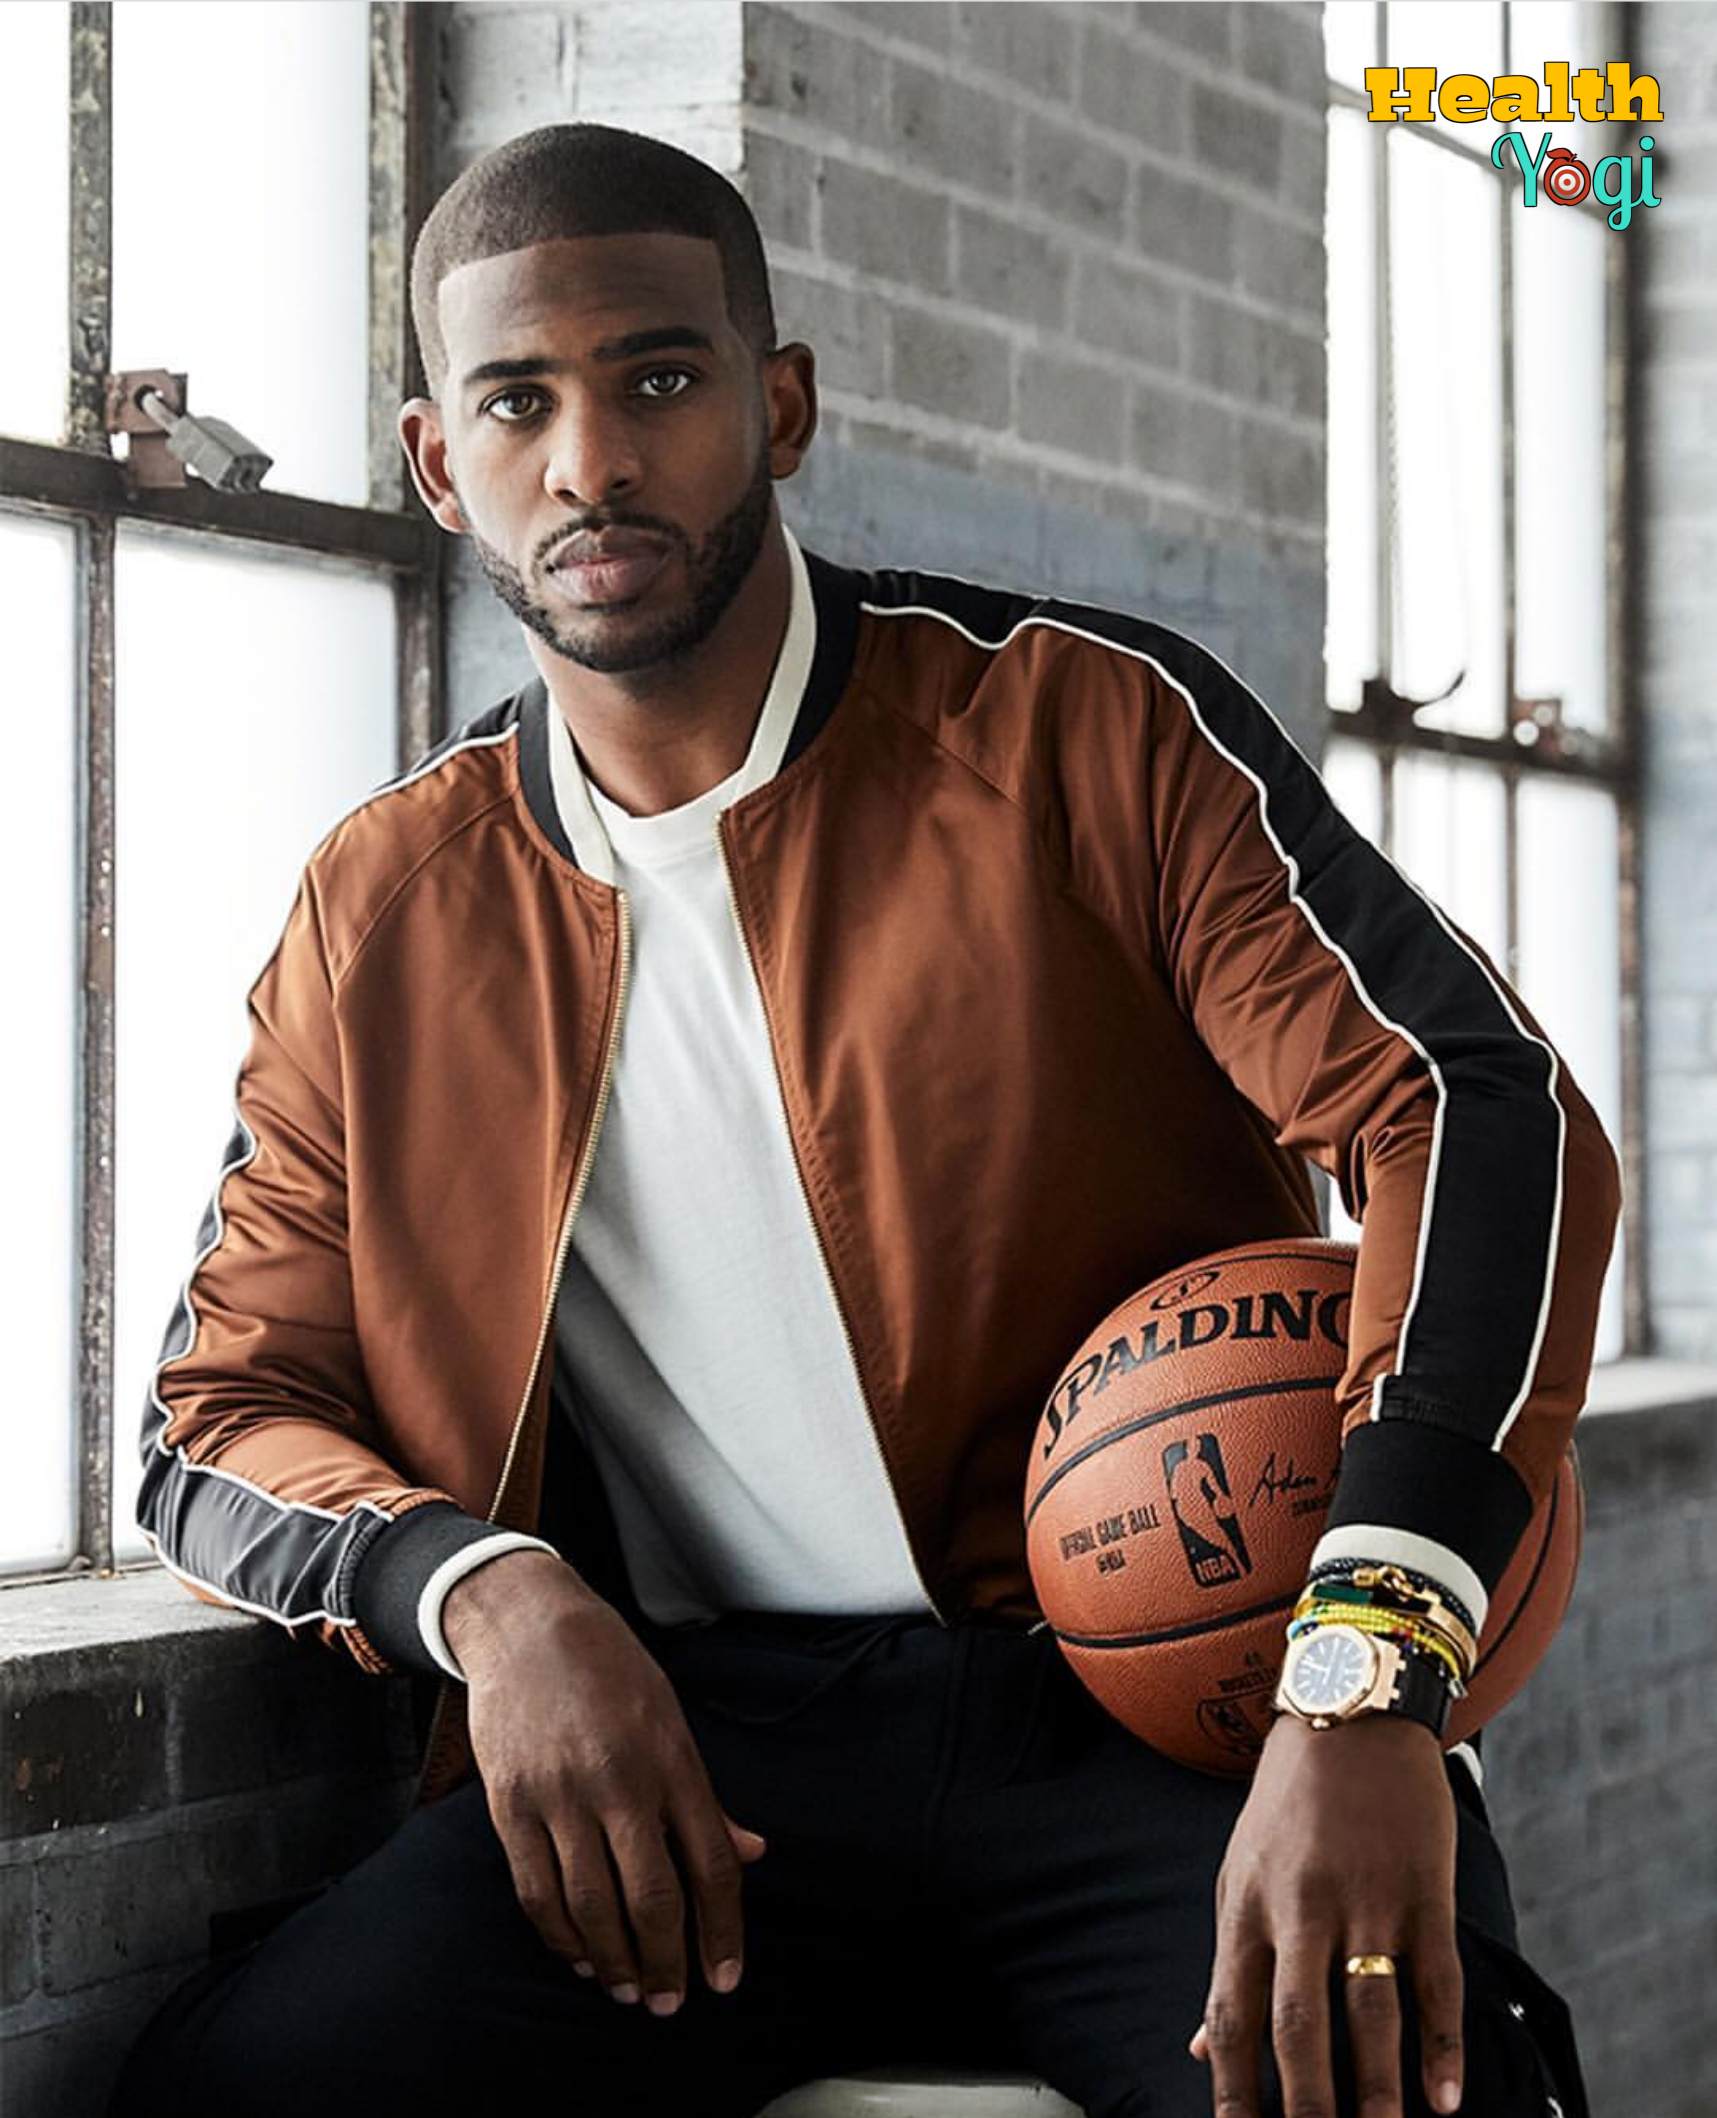 Chris Paul Workout Routine and Diet Plan | Age | Height | Body Measurements | Workout Videos | Instagram Photos 2019, Chris Paul workout, Chris Paul workout plan, Chris Paul diet , Chris Paul meal plan, Chris Paul age height weight body stats, Chris Paul body HD Photo, Chris Paul abs, Chris Paul fitness, Chris Paul biceps, Chris Paul instagram images, Chris Paul training , Chris Paul workout videos